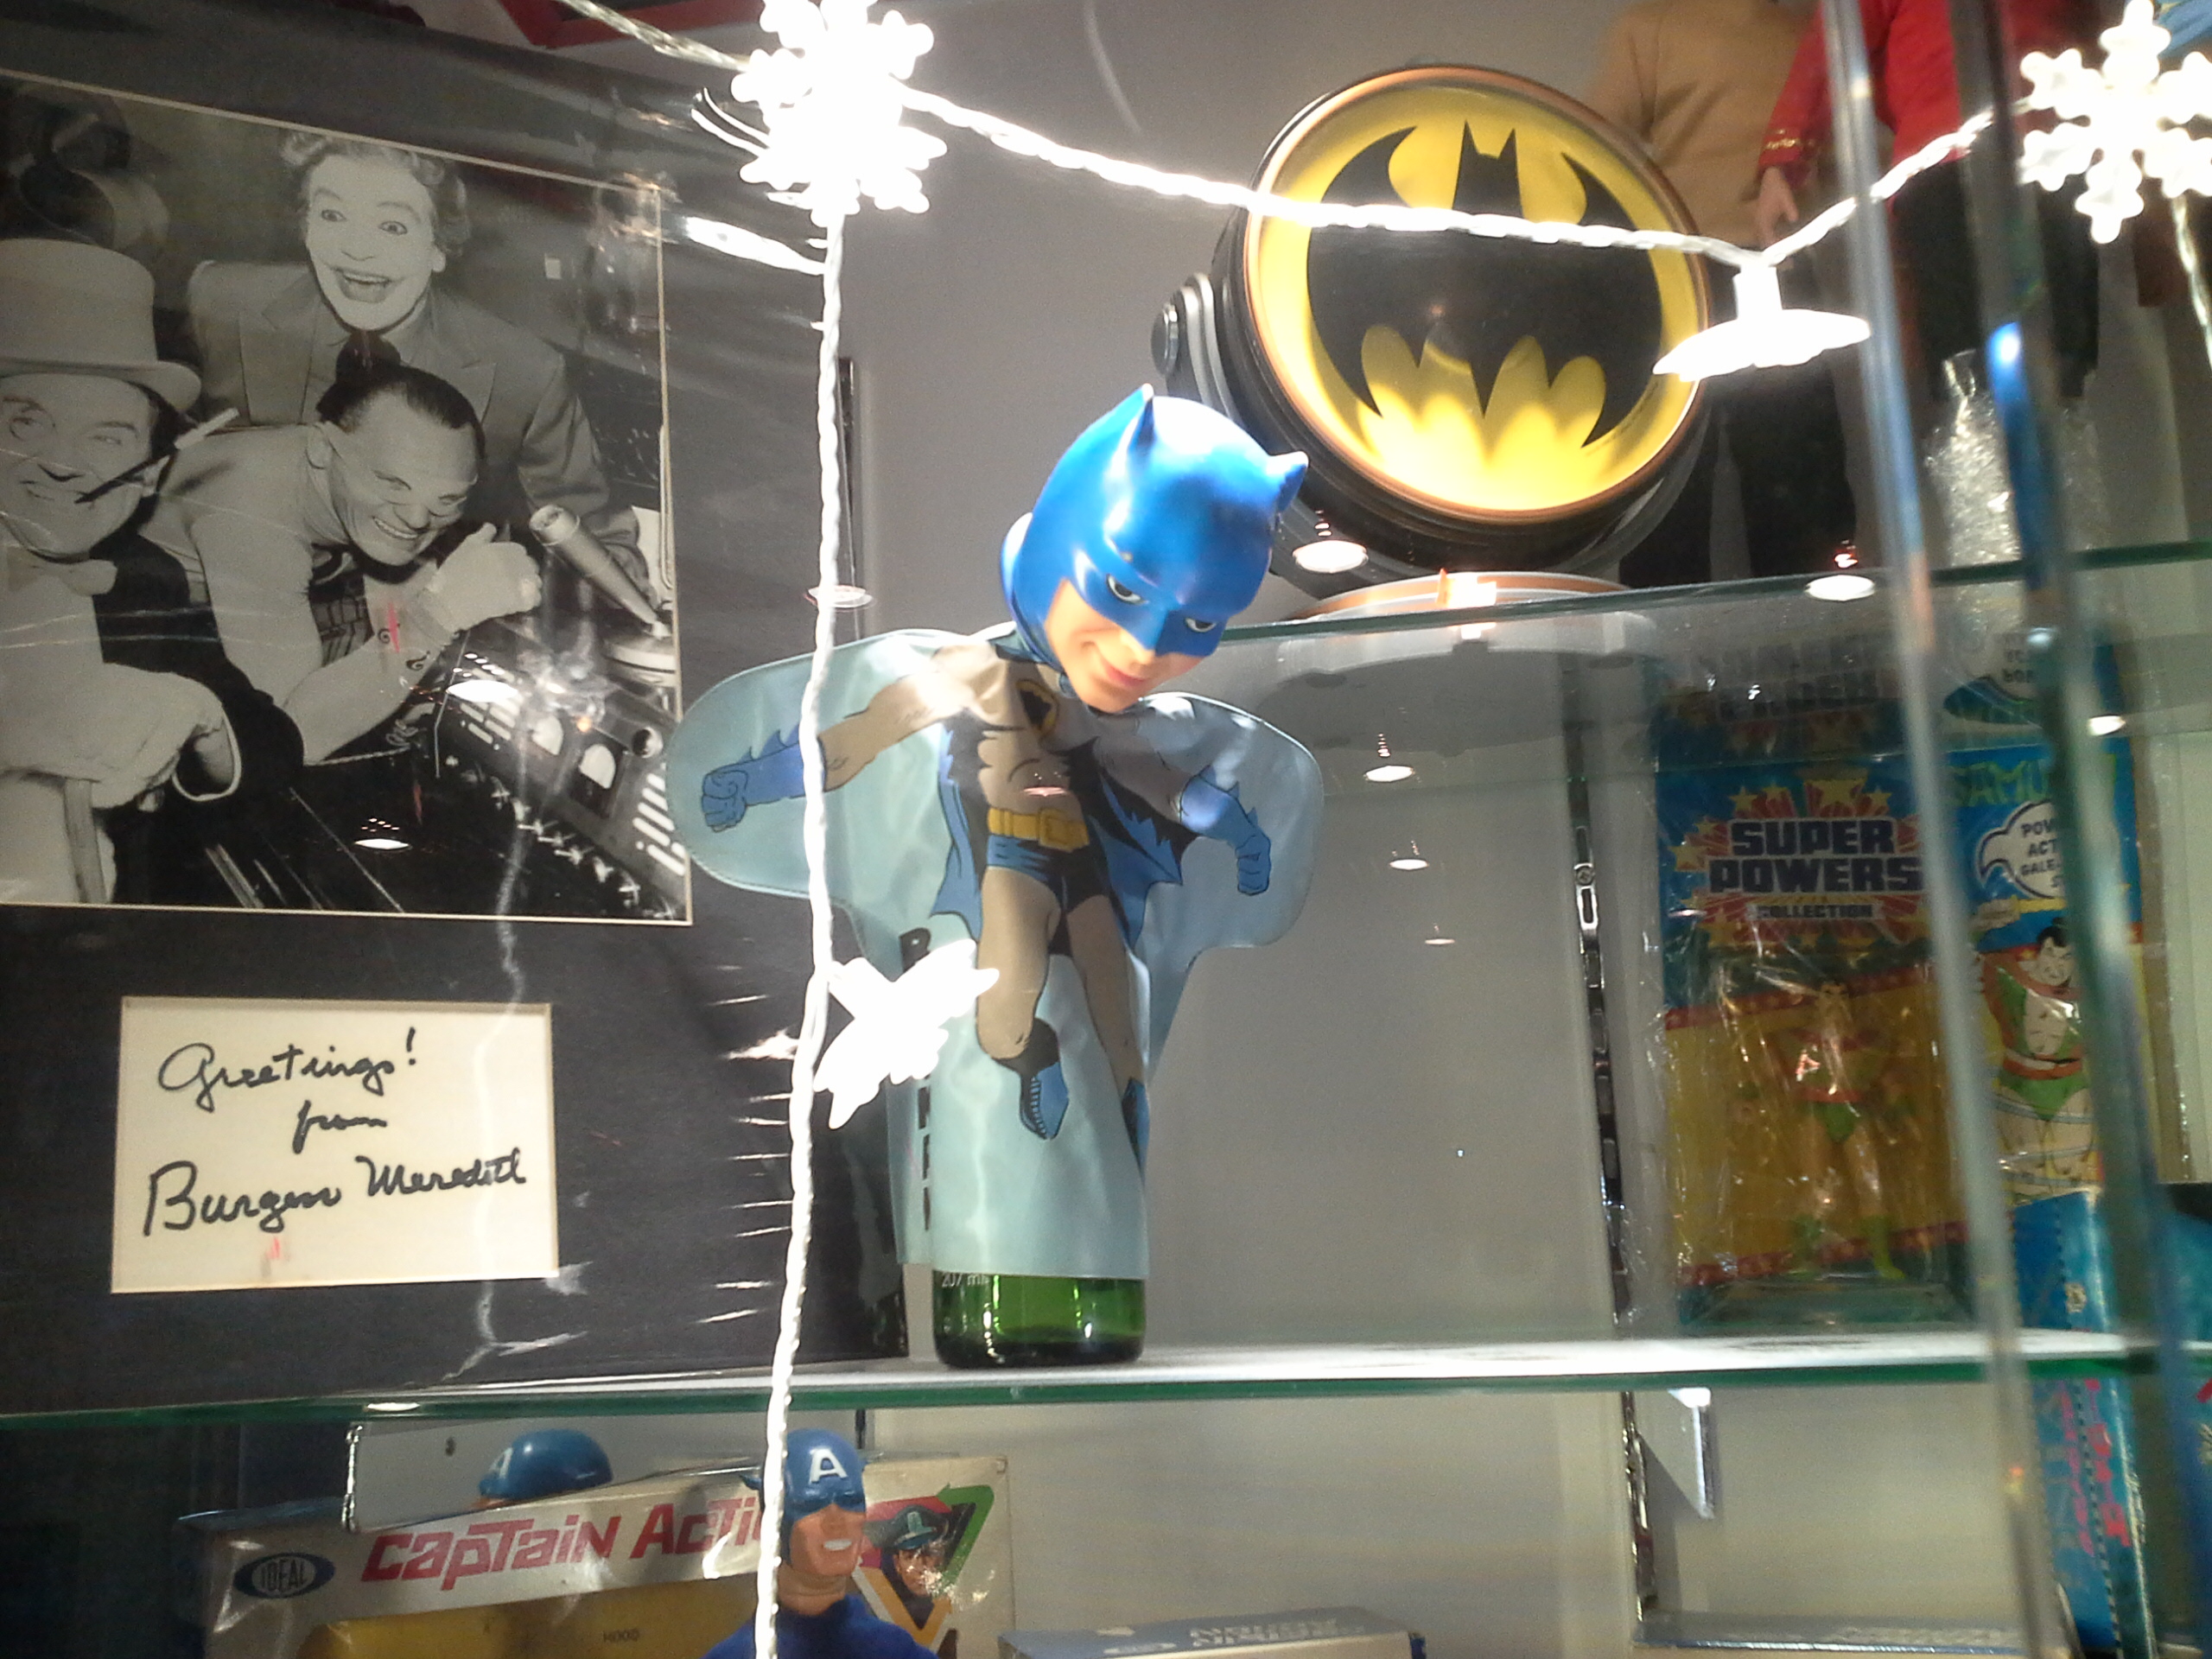 A great old Batman beer bottle cover(?) next to the autograph of Mr. Penguin himself, Burgess Meredith!